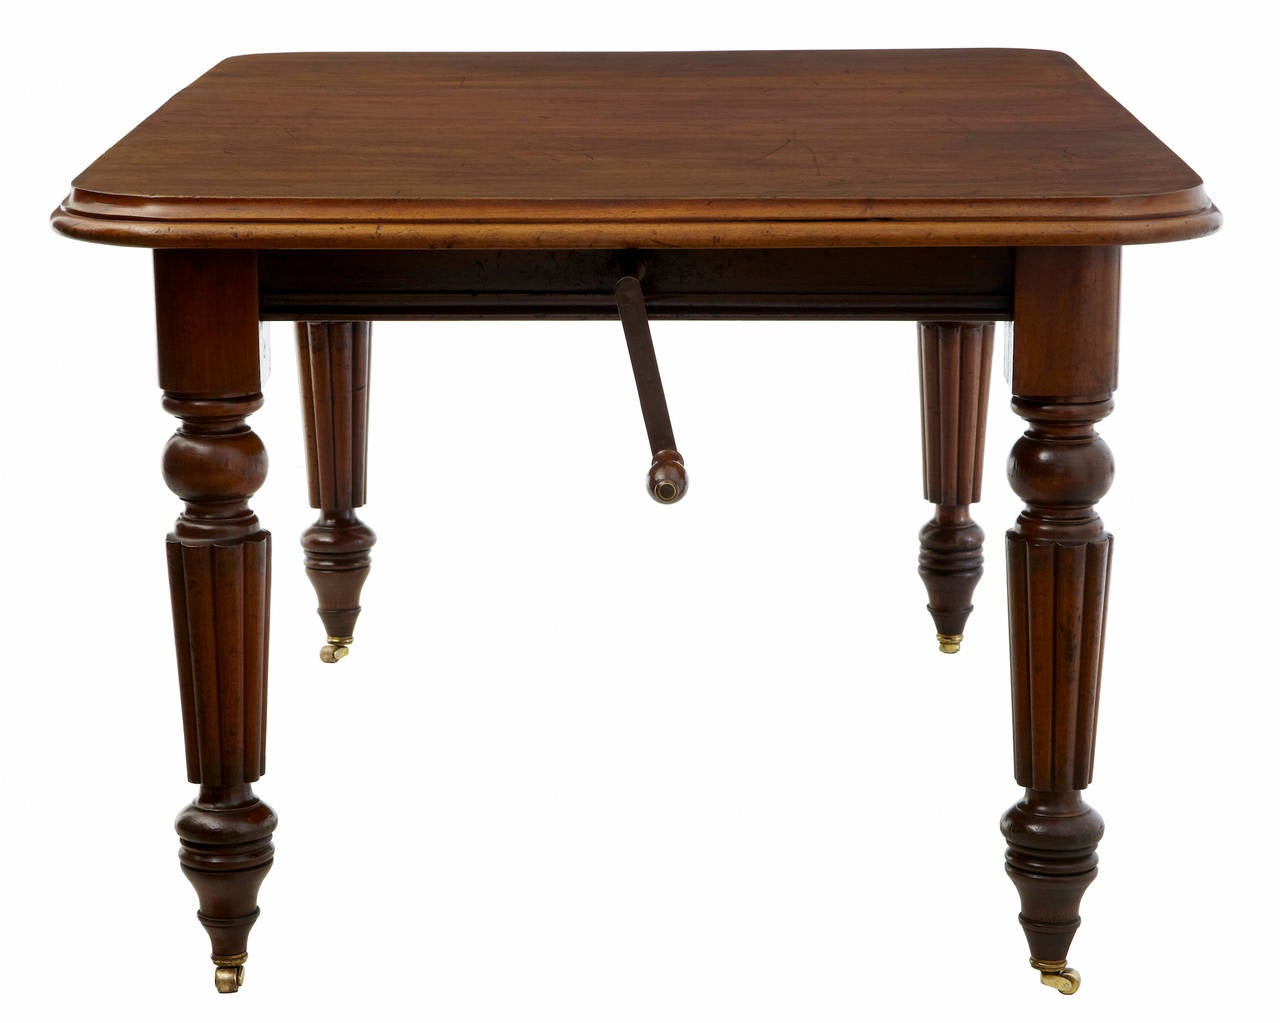 Small mahogany dining table, circa 1870. Extending with one leaf, would seat a comfortable six. Standing on fluted legs with brass castors. Marks to top, please see pictures.
Measures: Height 29 1/2